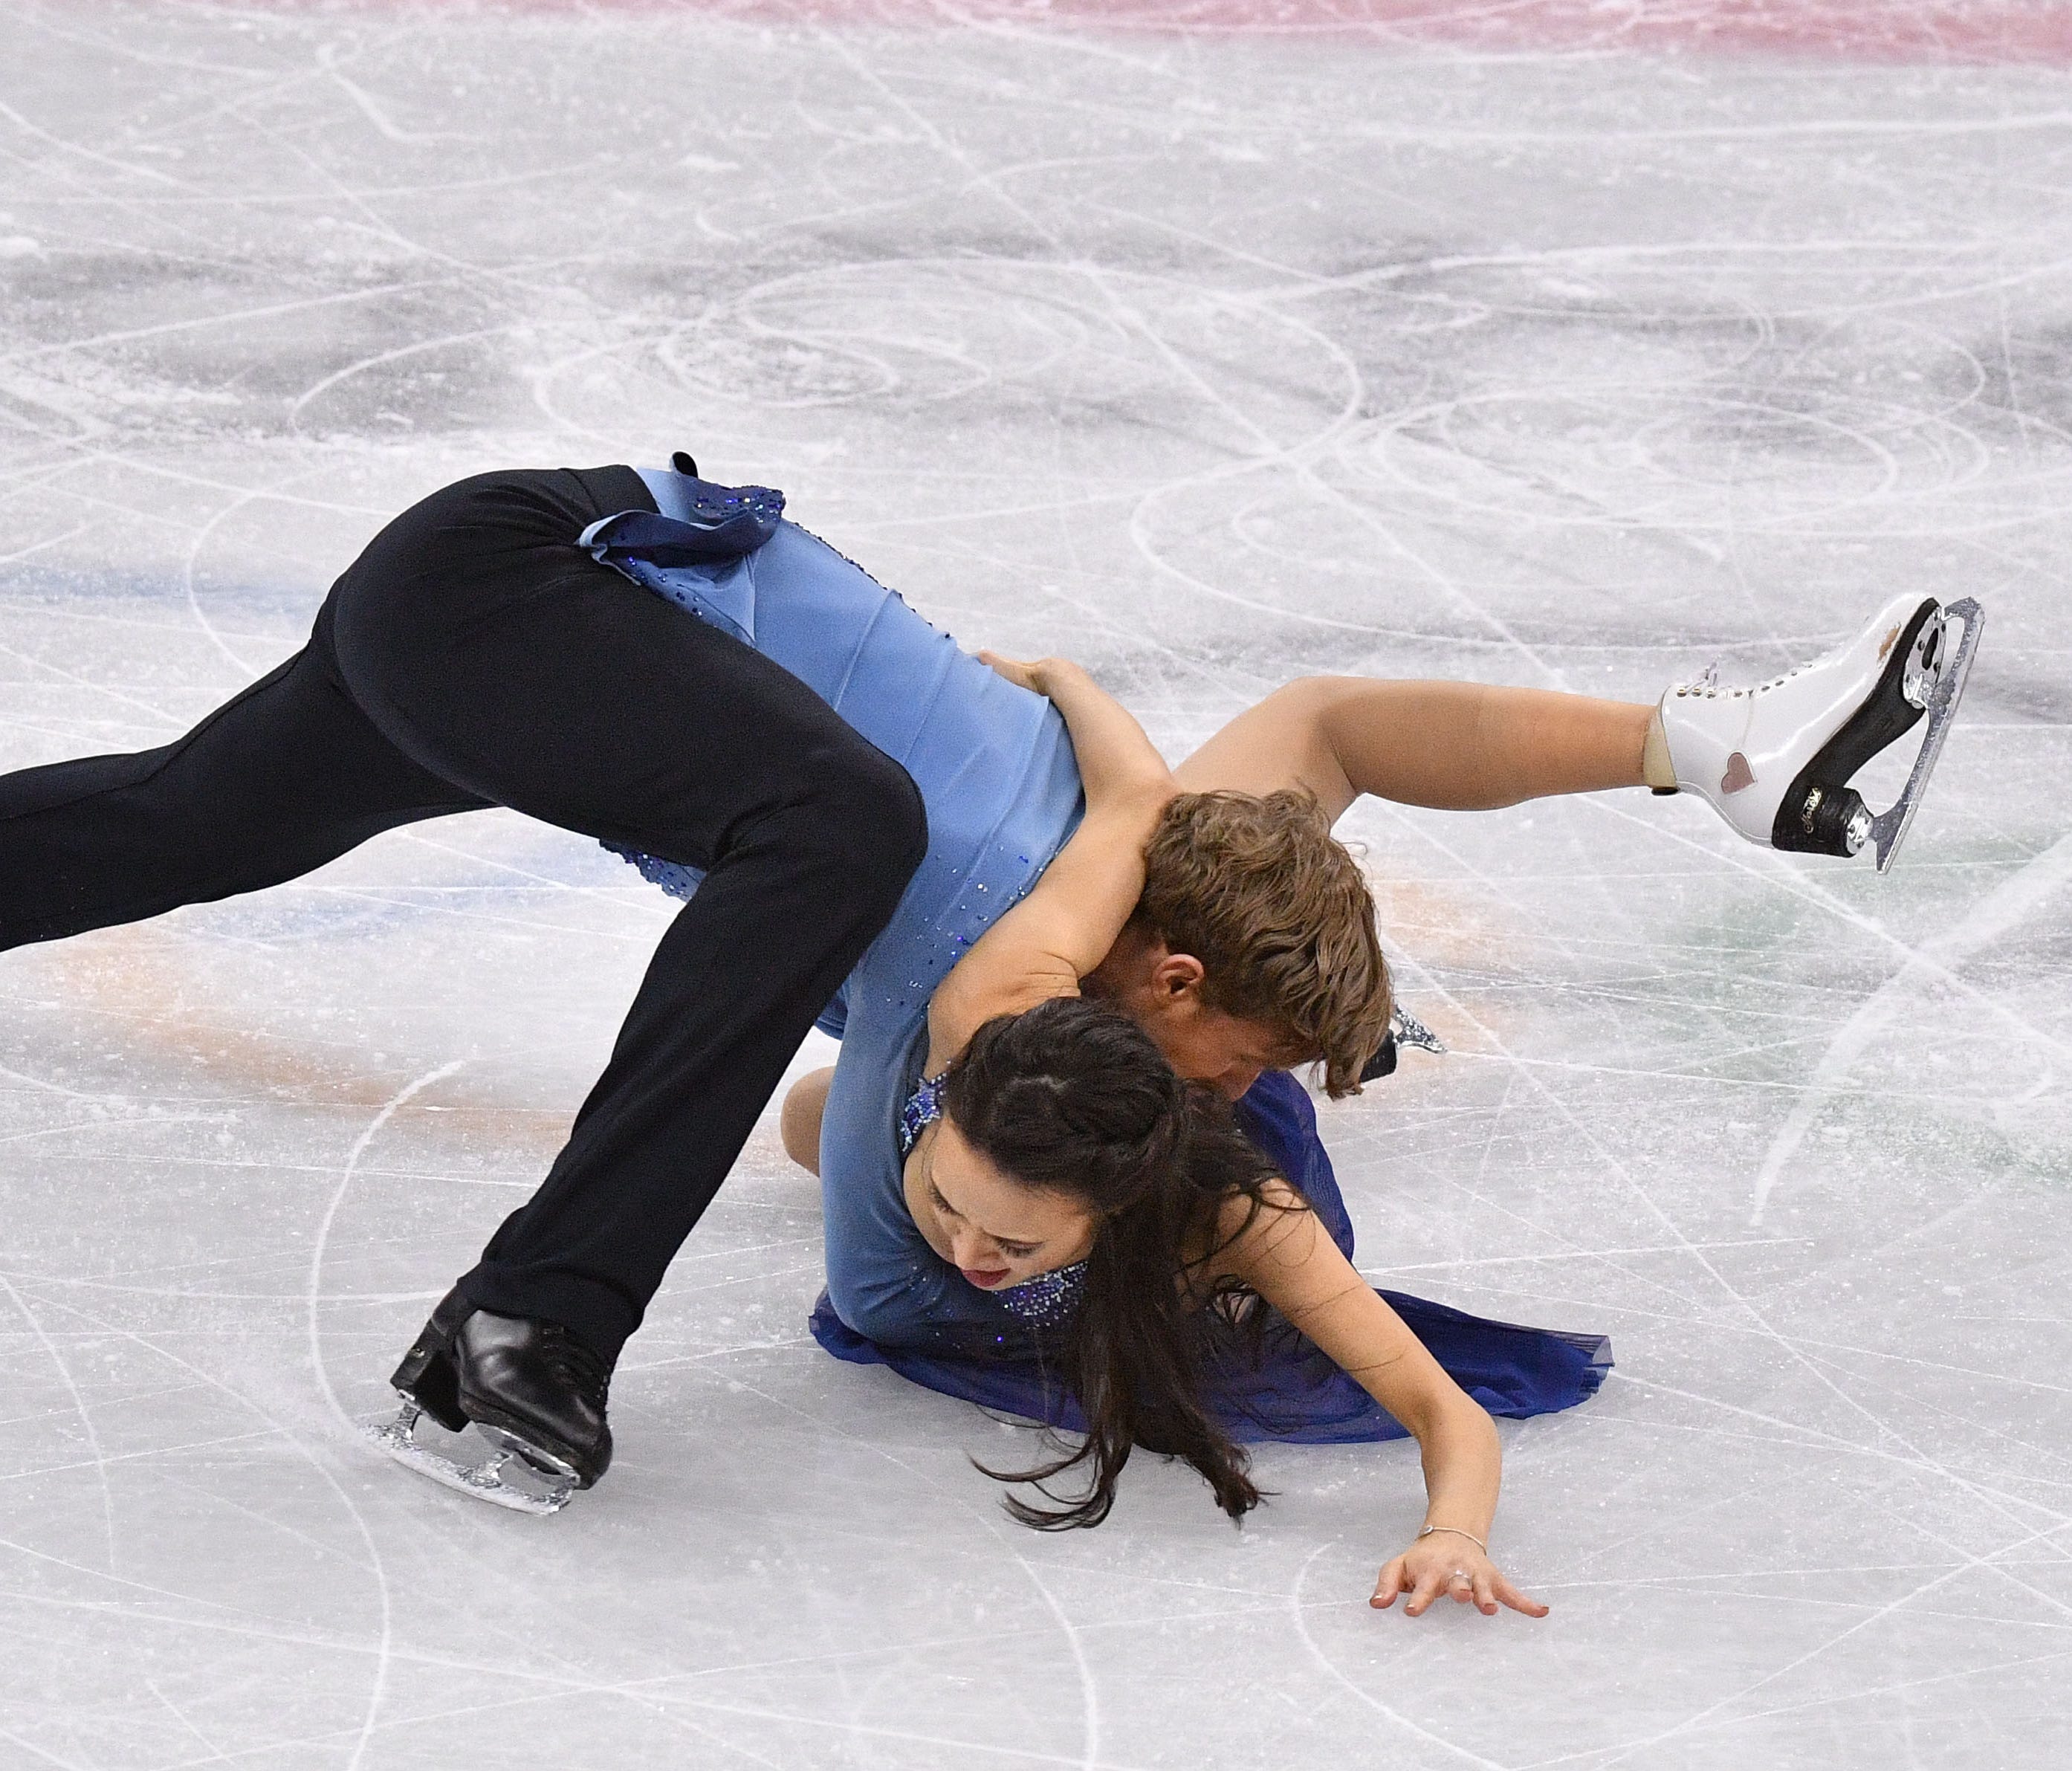 Madison Chock and Evan Bates (USA) fall to the ice as they perform in ice dancing.